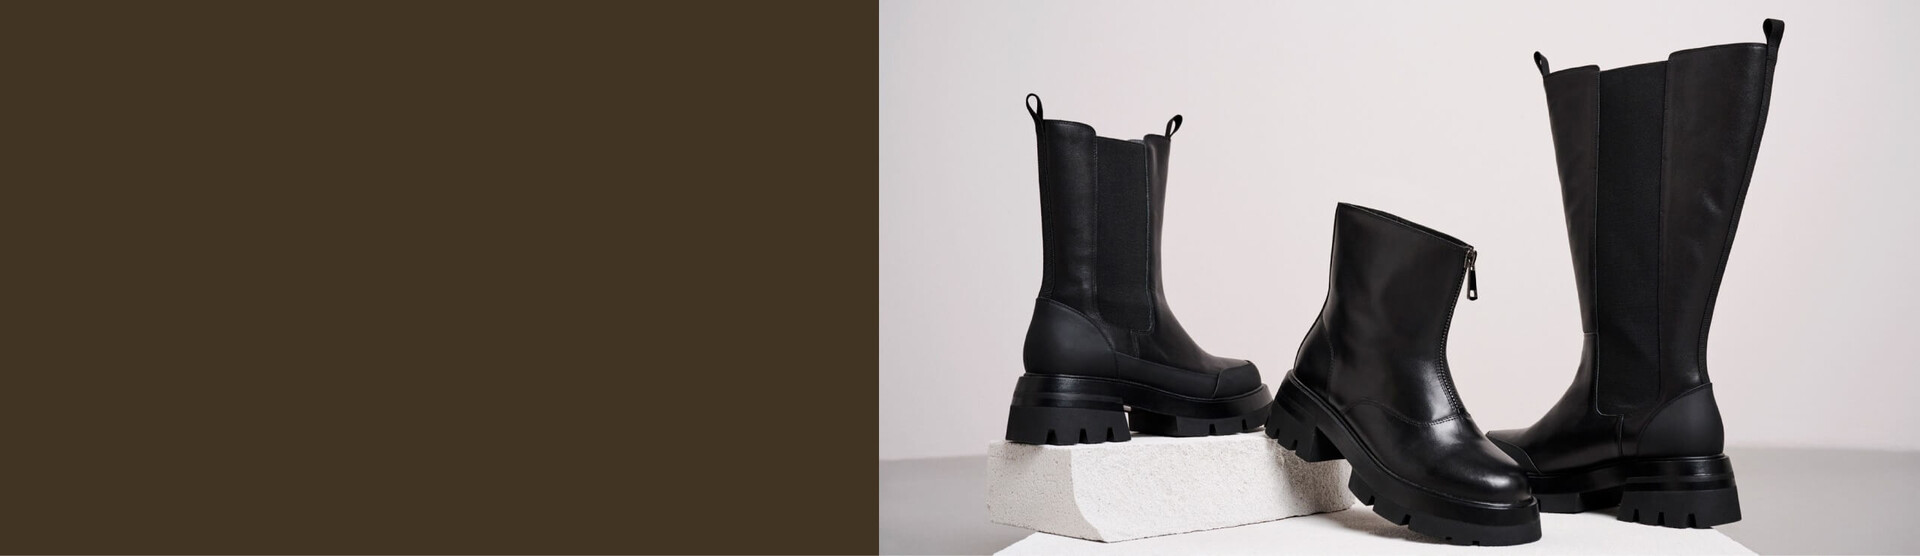 5 tips: How to care for your leather boots 